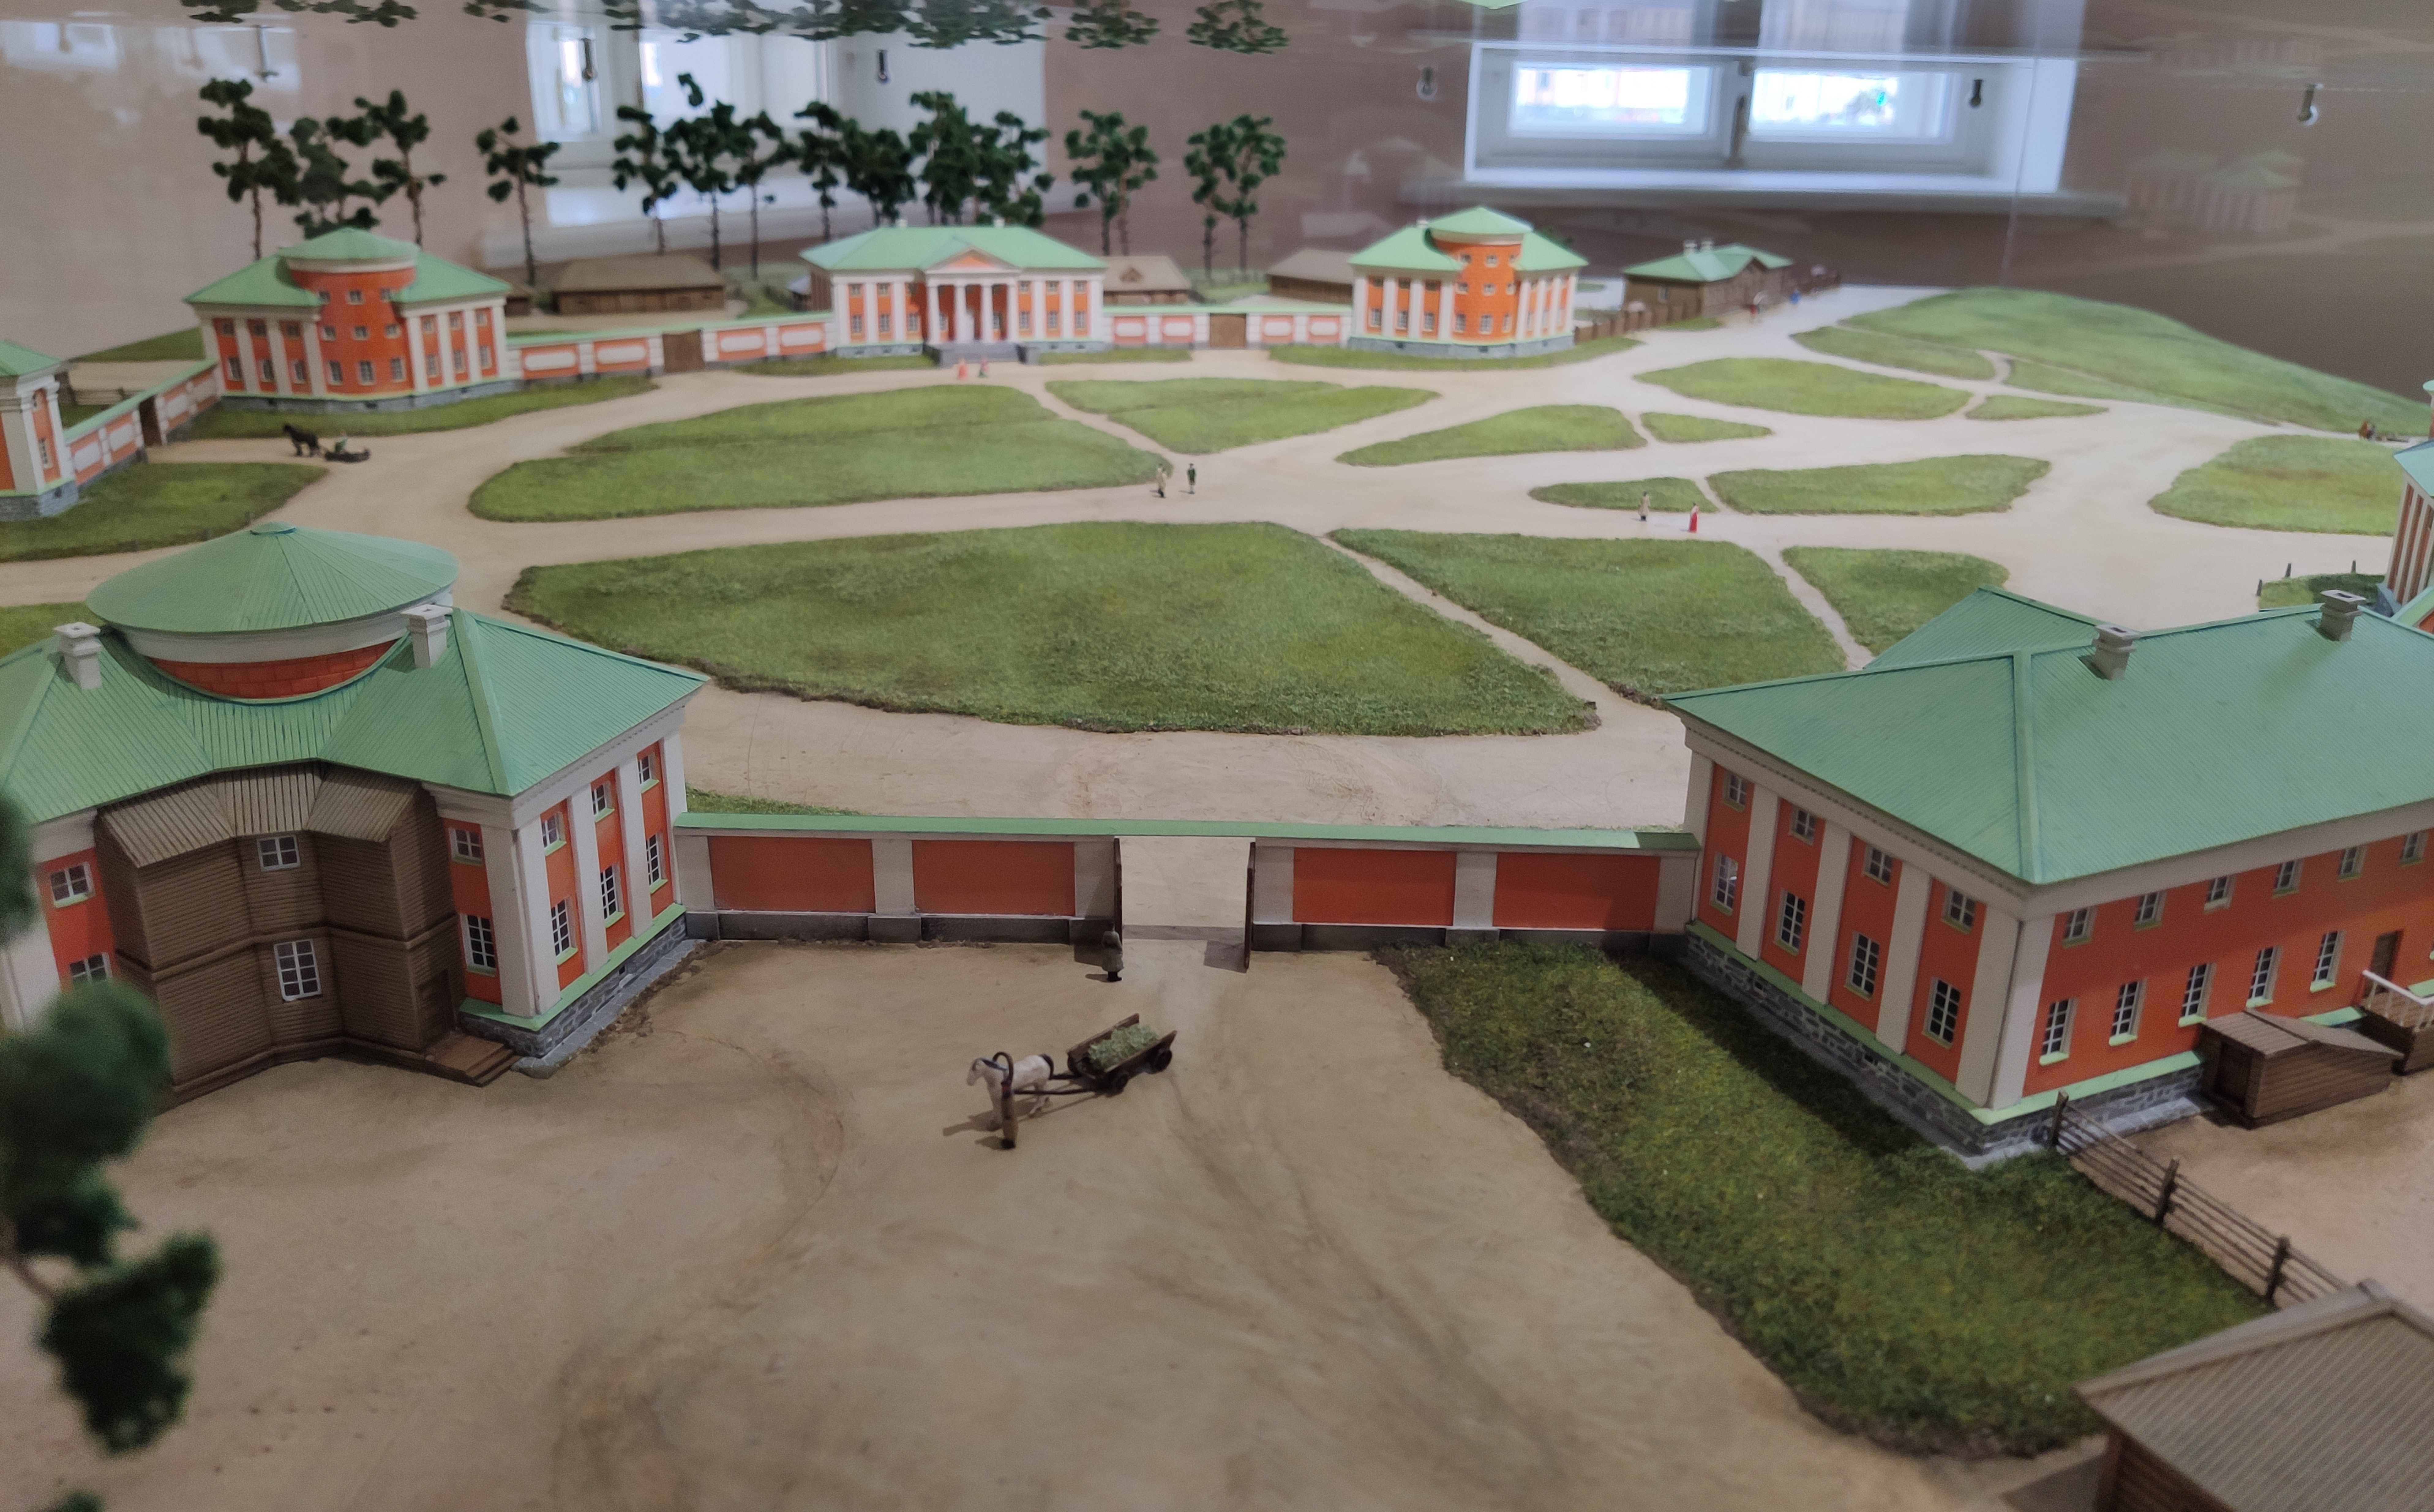 a model of the Round Square (now Lenin Square) of Petrozavodsk from 1775-1785